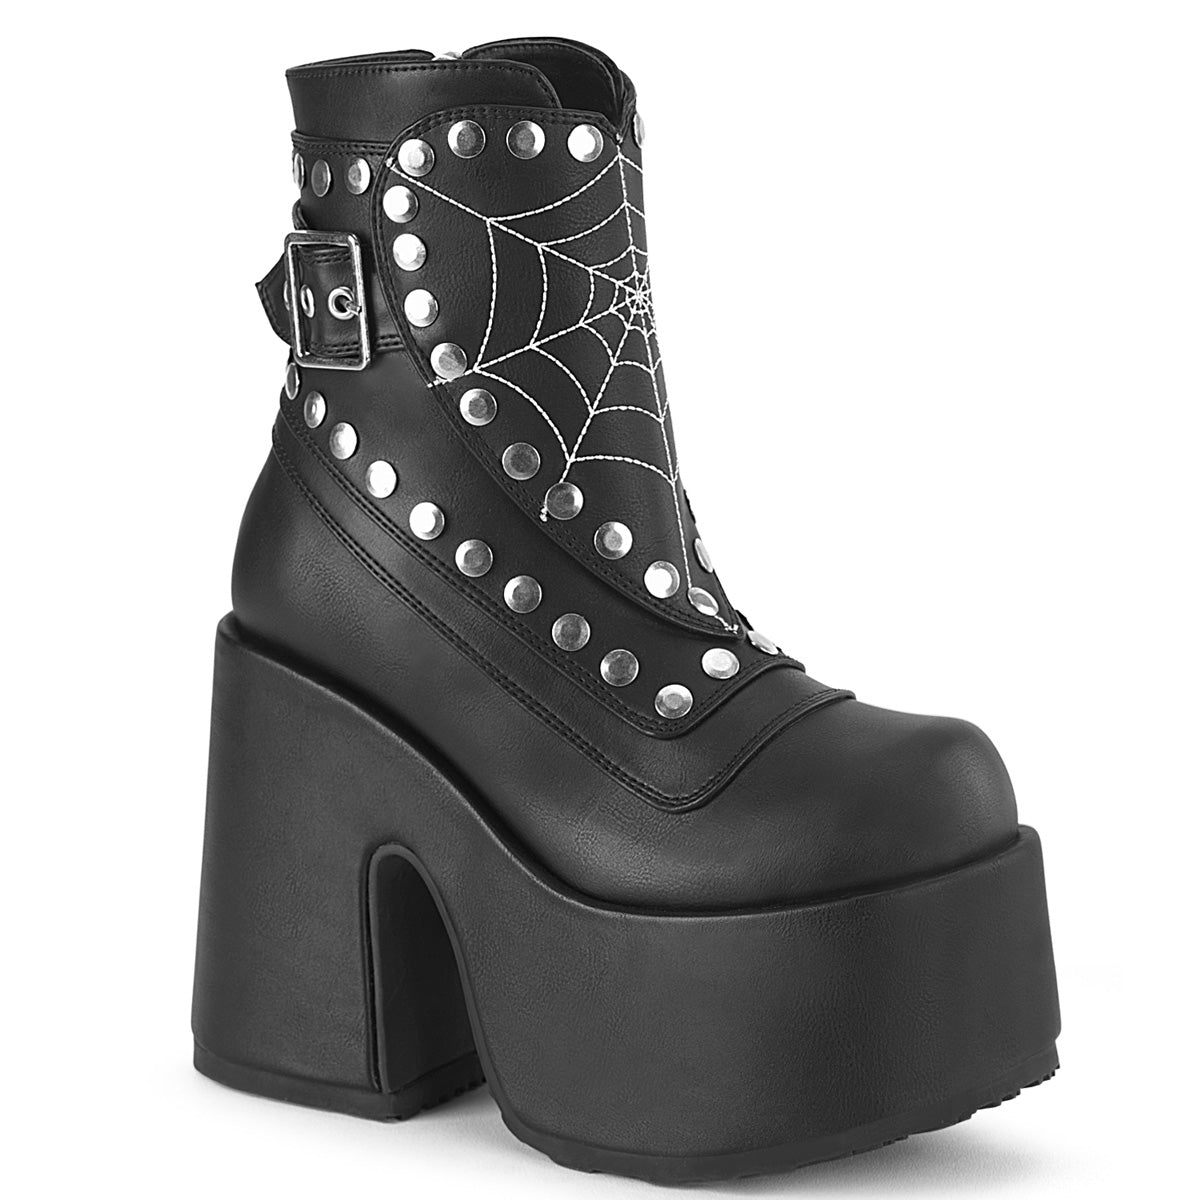 CAMEL-70 Spiderweb Chunky Heel Boots by Demonia